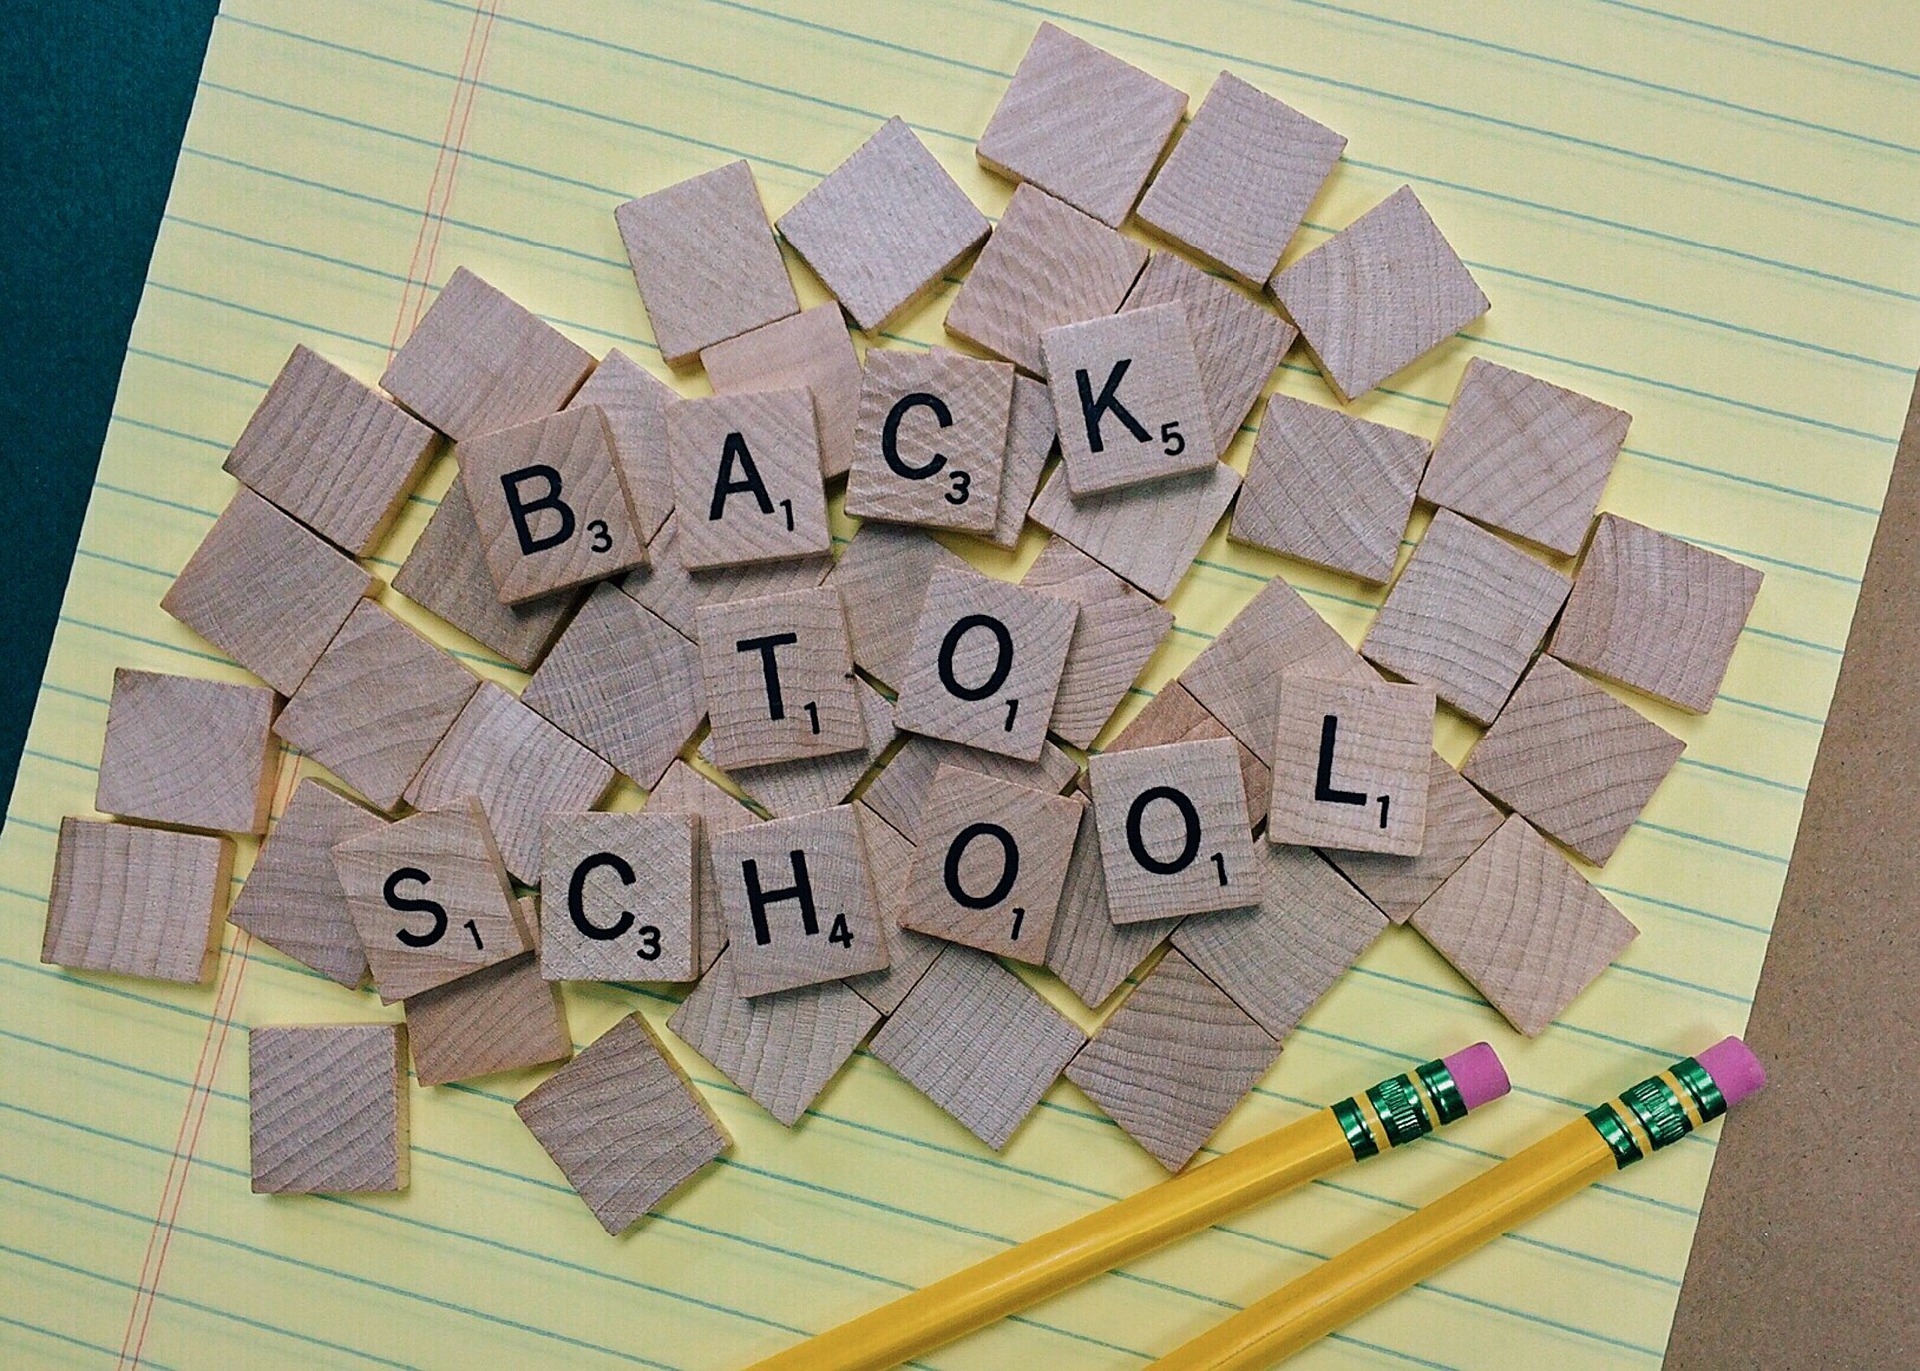 Back to School spelled out with scrabble tiles